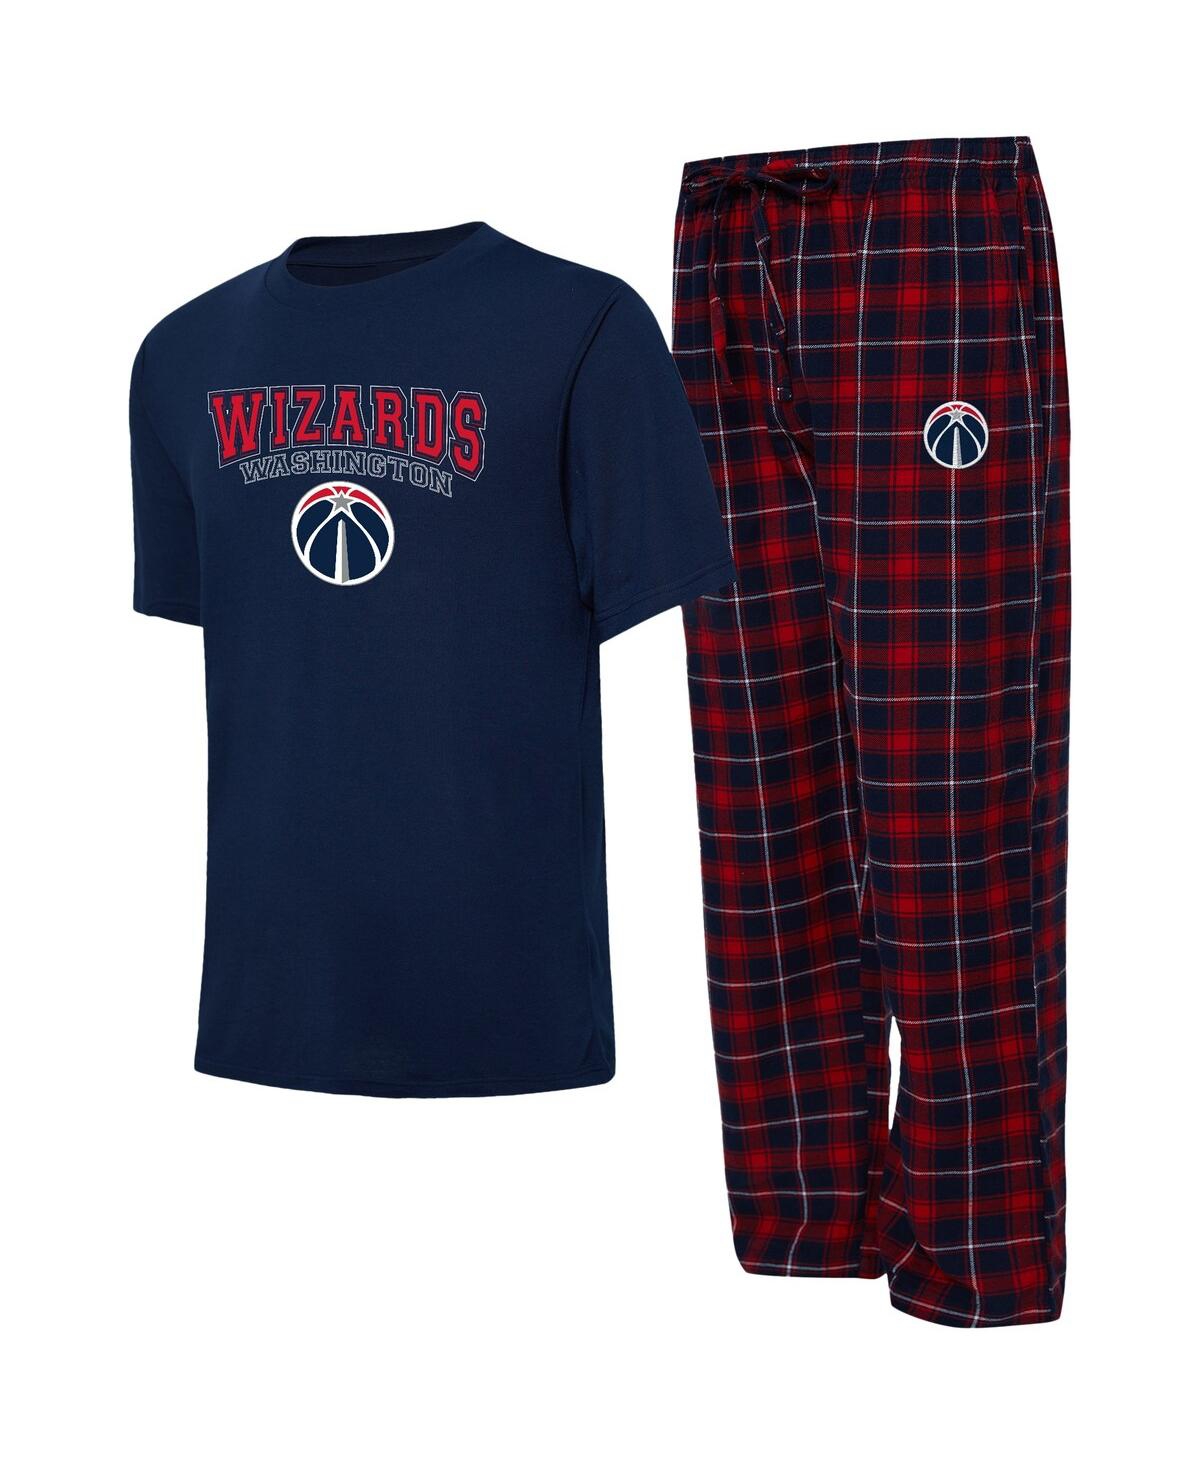 Men's College Concepts Navy, Red Washington Wizards Arctic T-shirt and Pajama Pants Sleep Set - Navy, Red